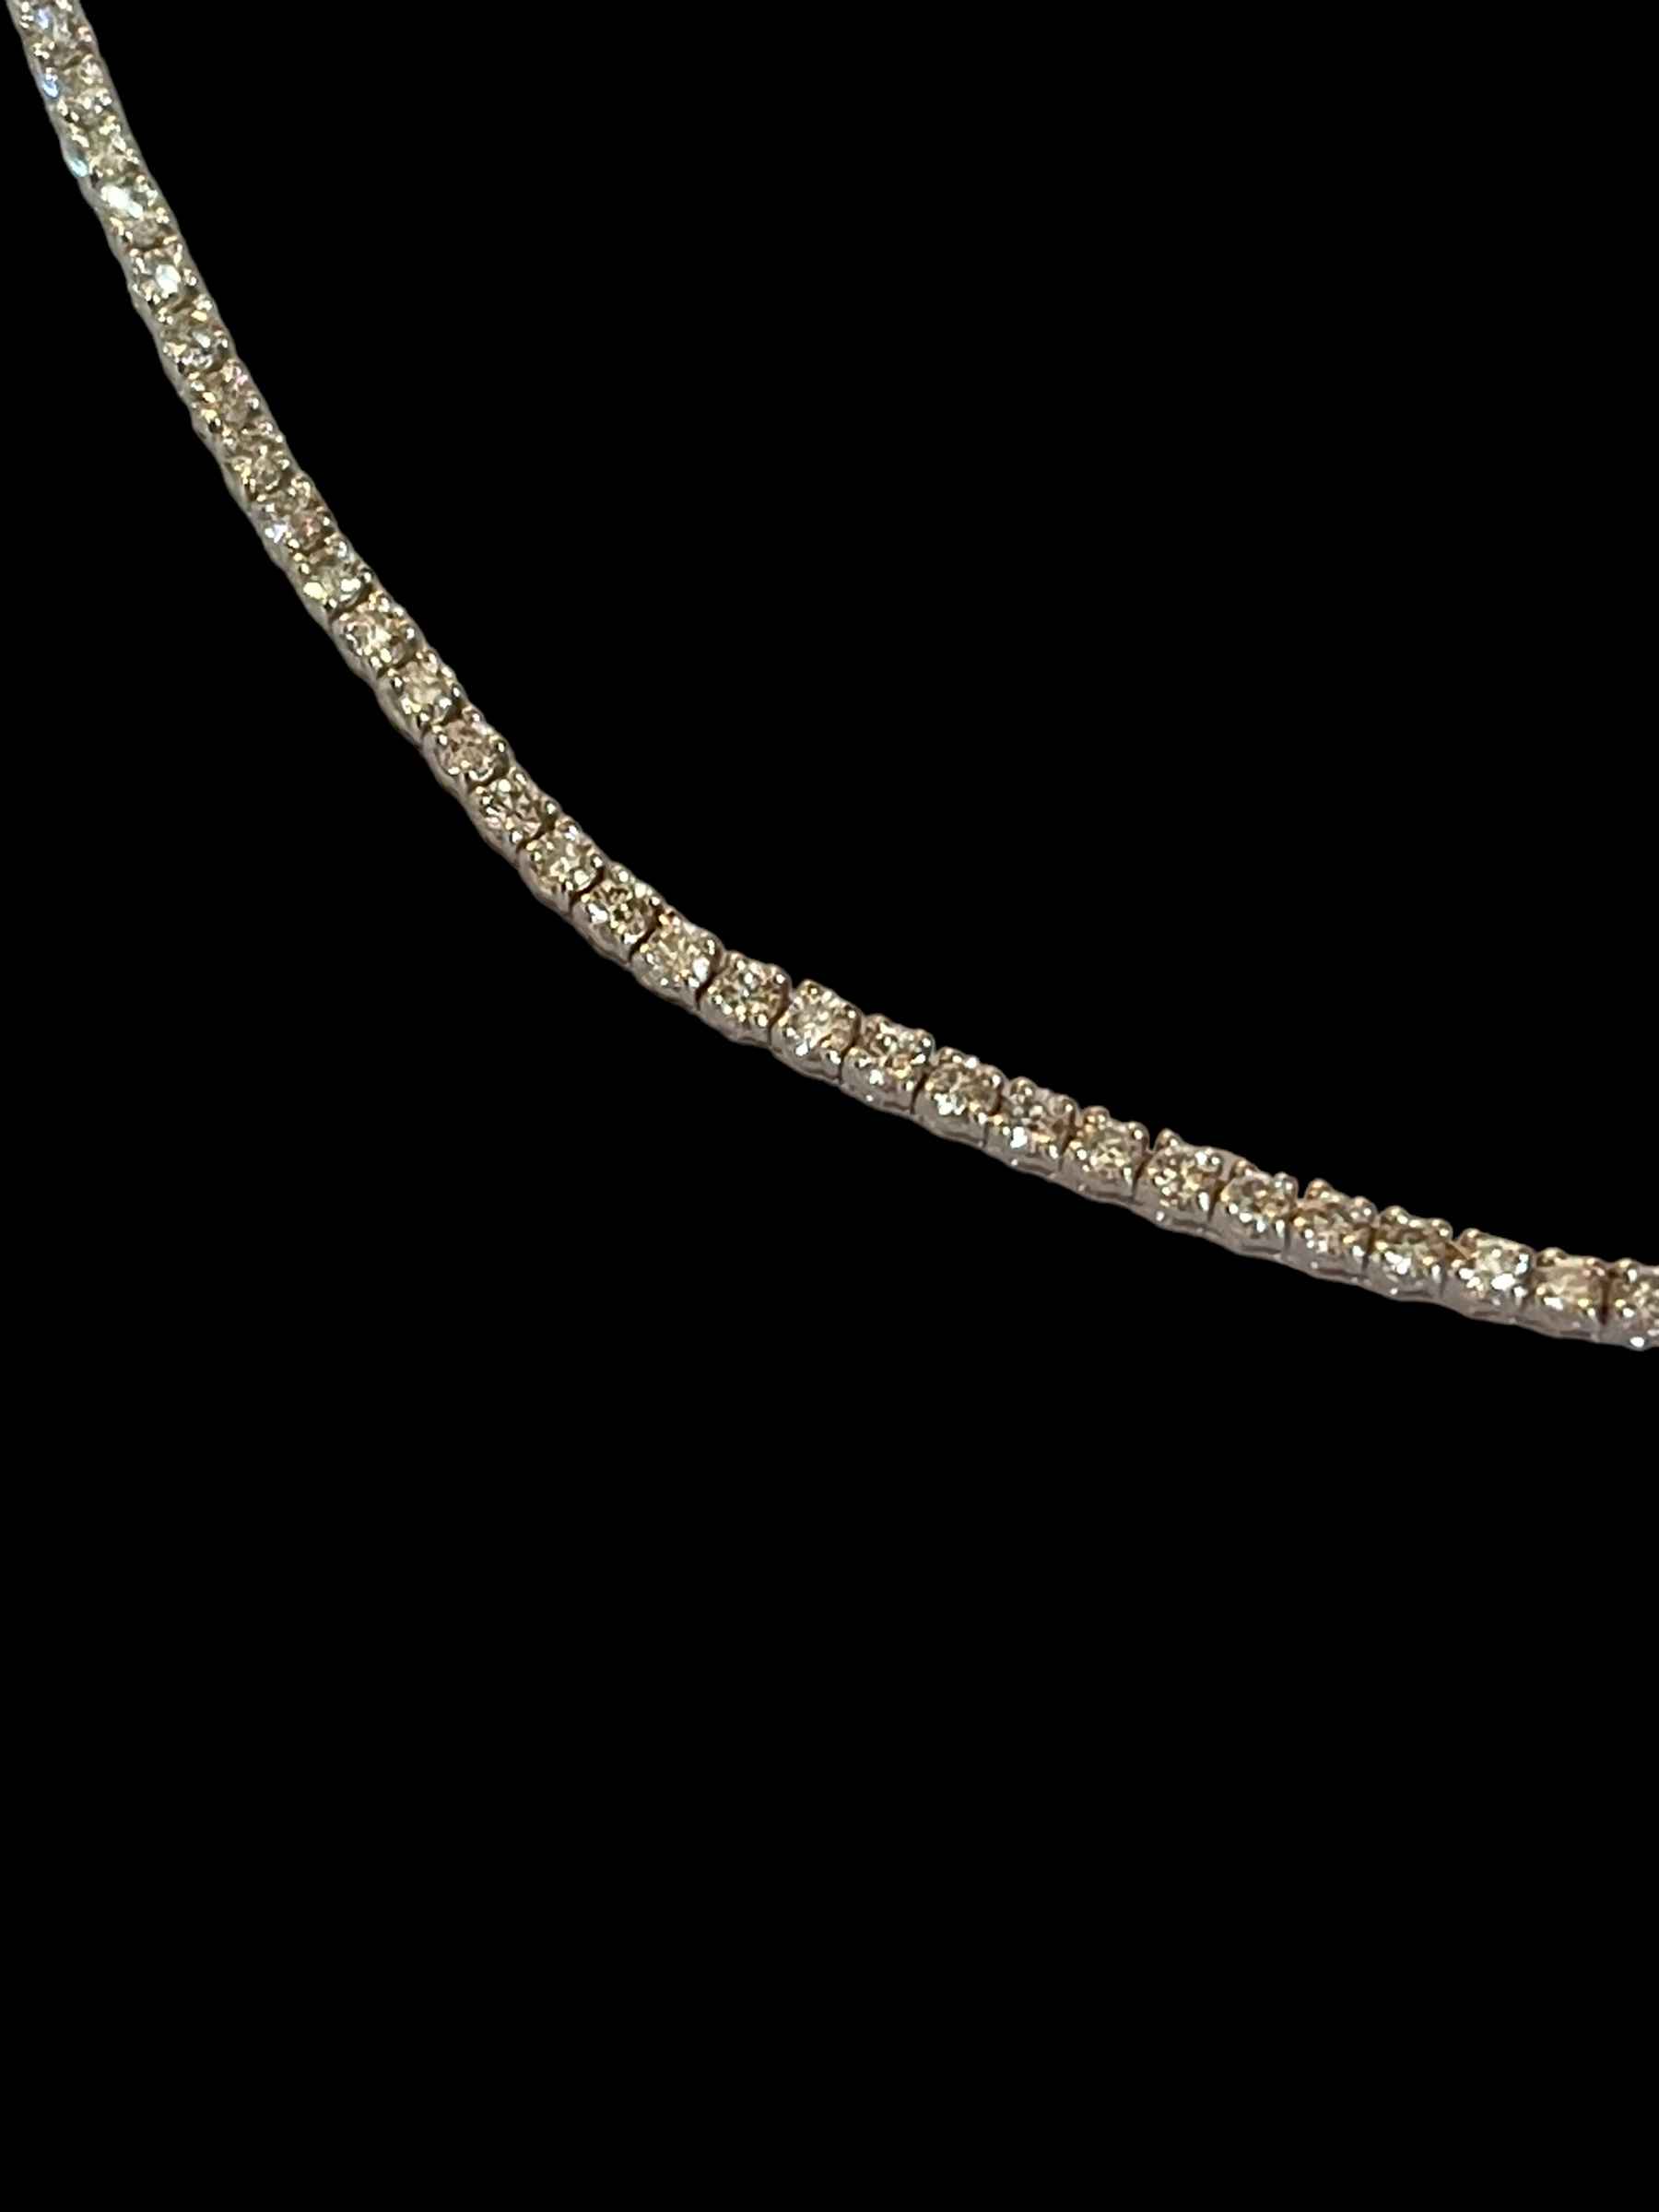 18 carat white gold and diamond tennis necklace, total diamond content 4.27 carats. - Image 2 of 2